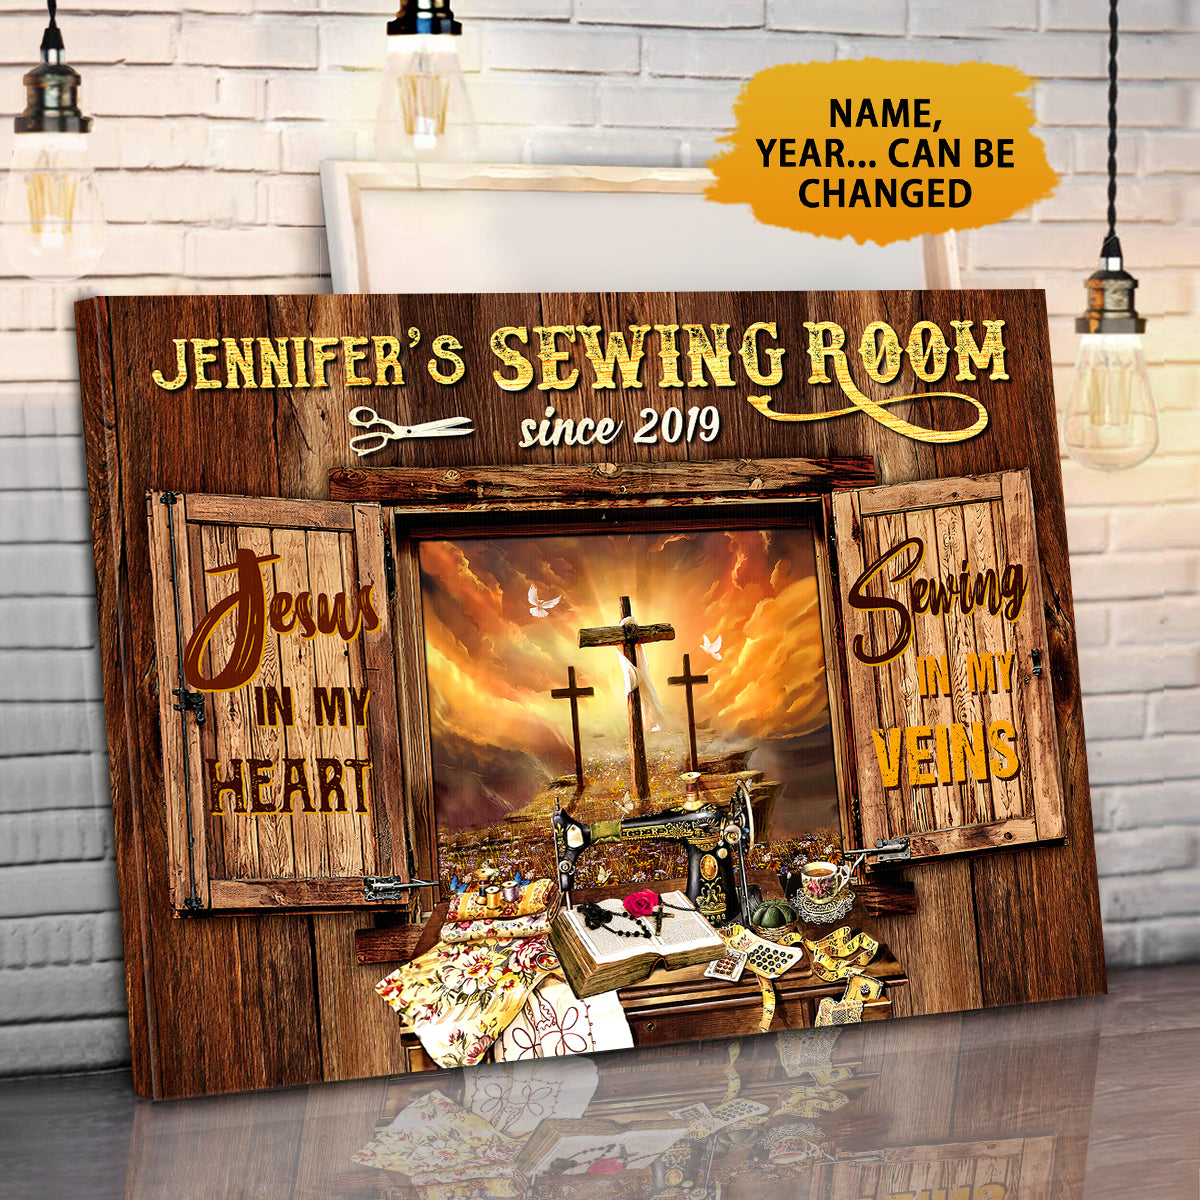 Sewing Room Jesus In My Heart Sewing In My Vein Canvas